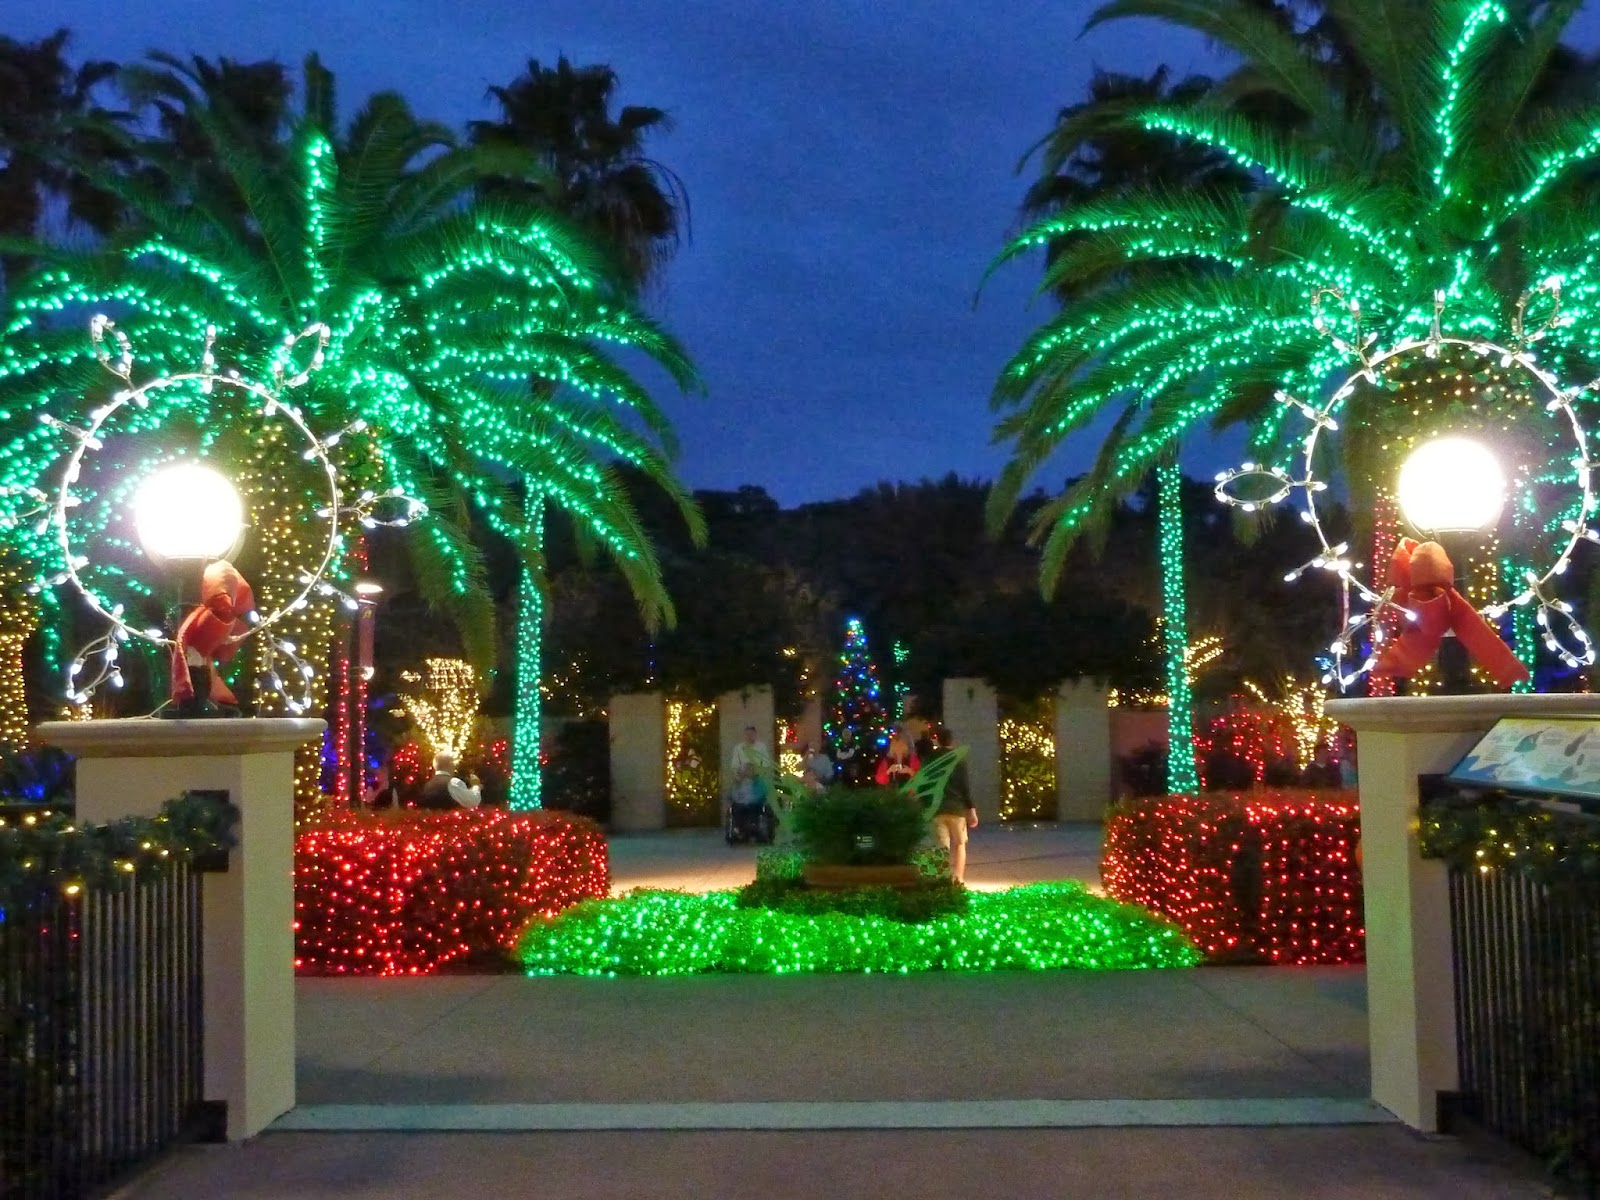 began to set we walked through Lights in the Garden at the Florida